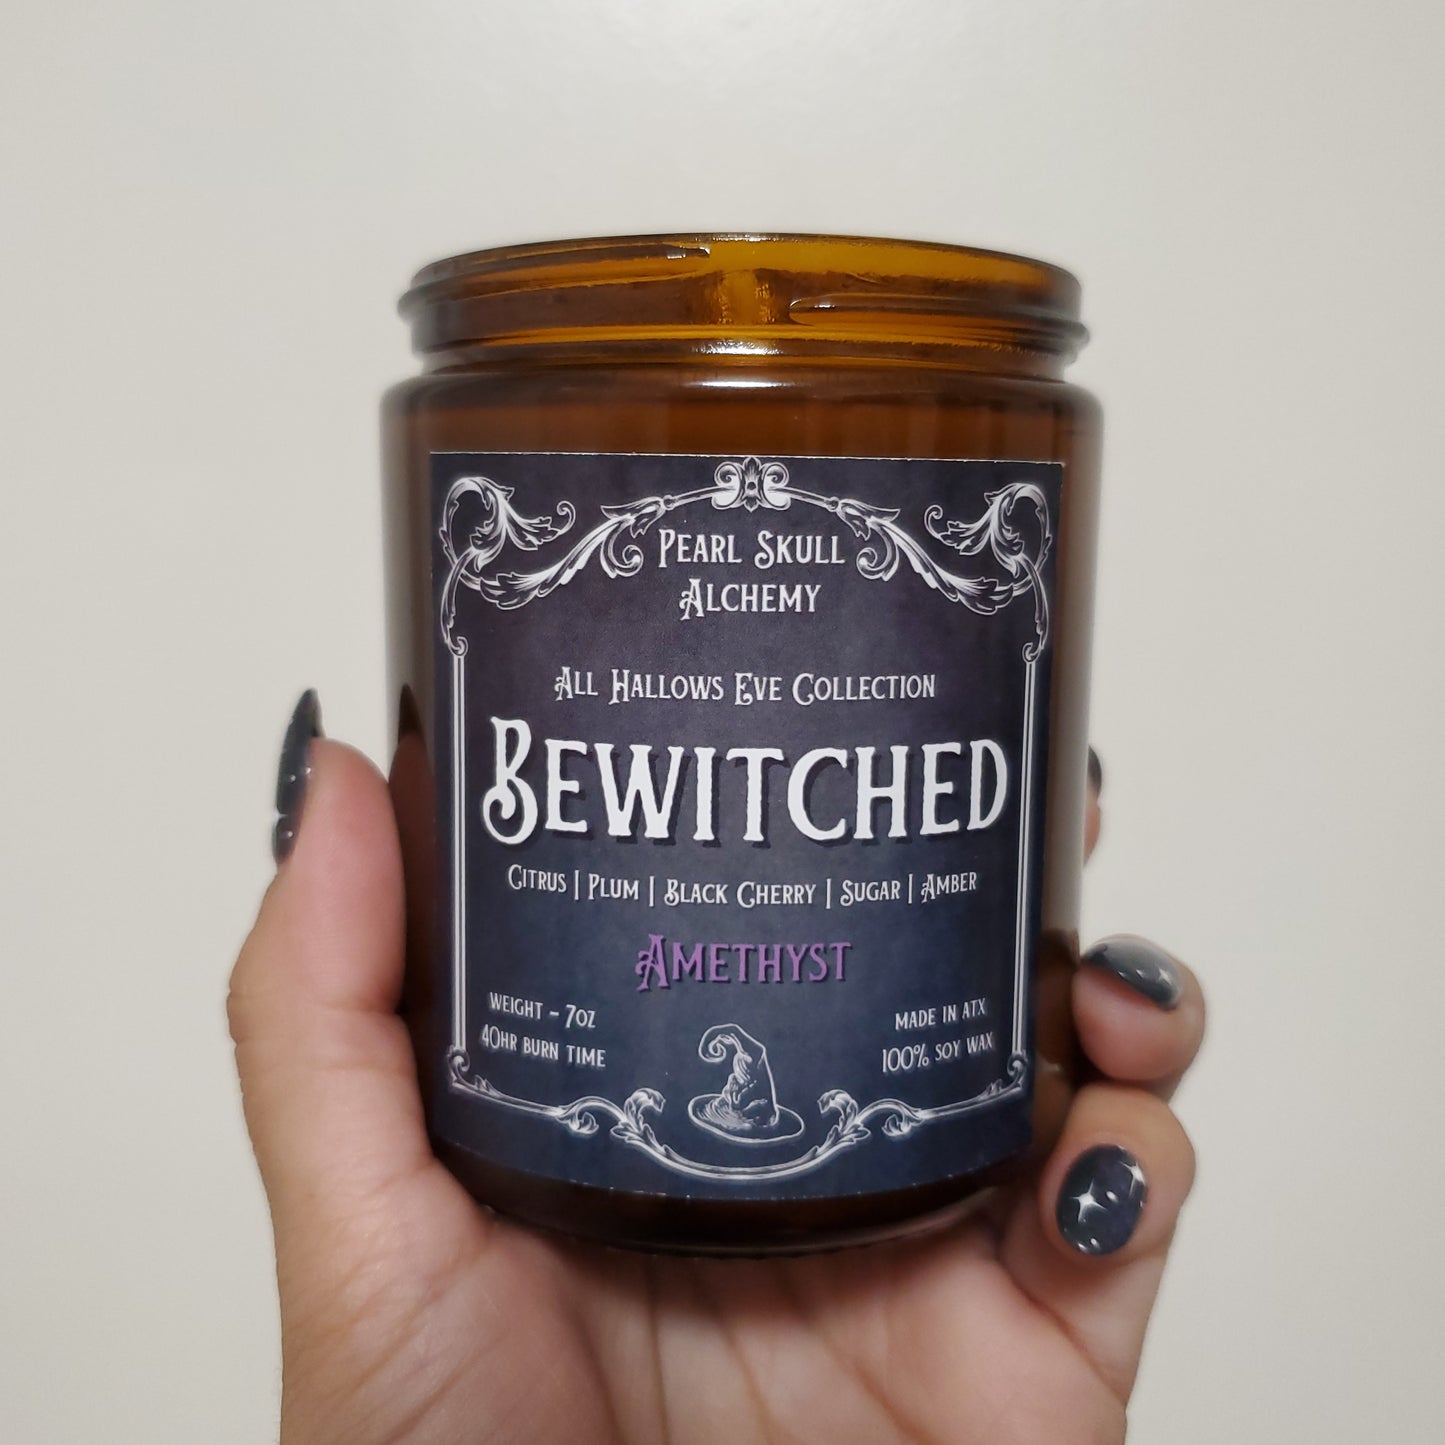 Bewitched - All Hallows Eve Collection